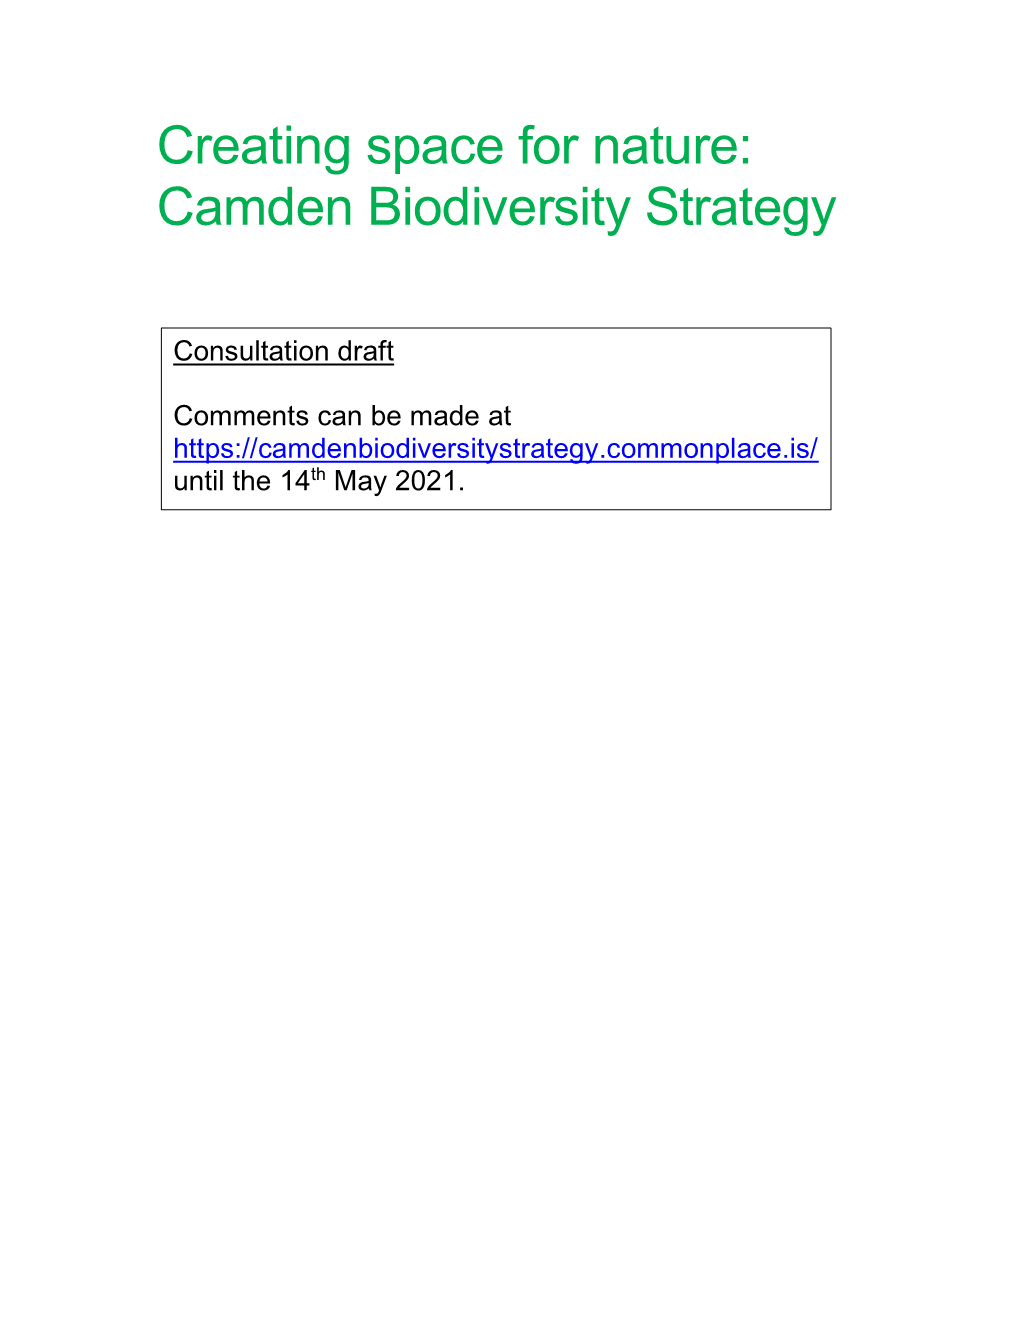 Creating Space for Nature: Camden Biodiversity Strategy